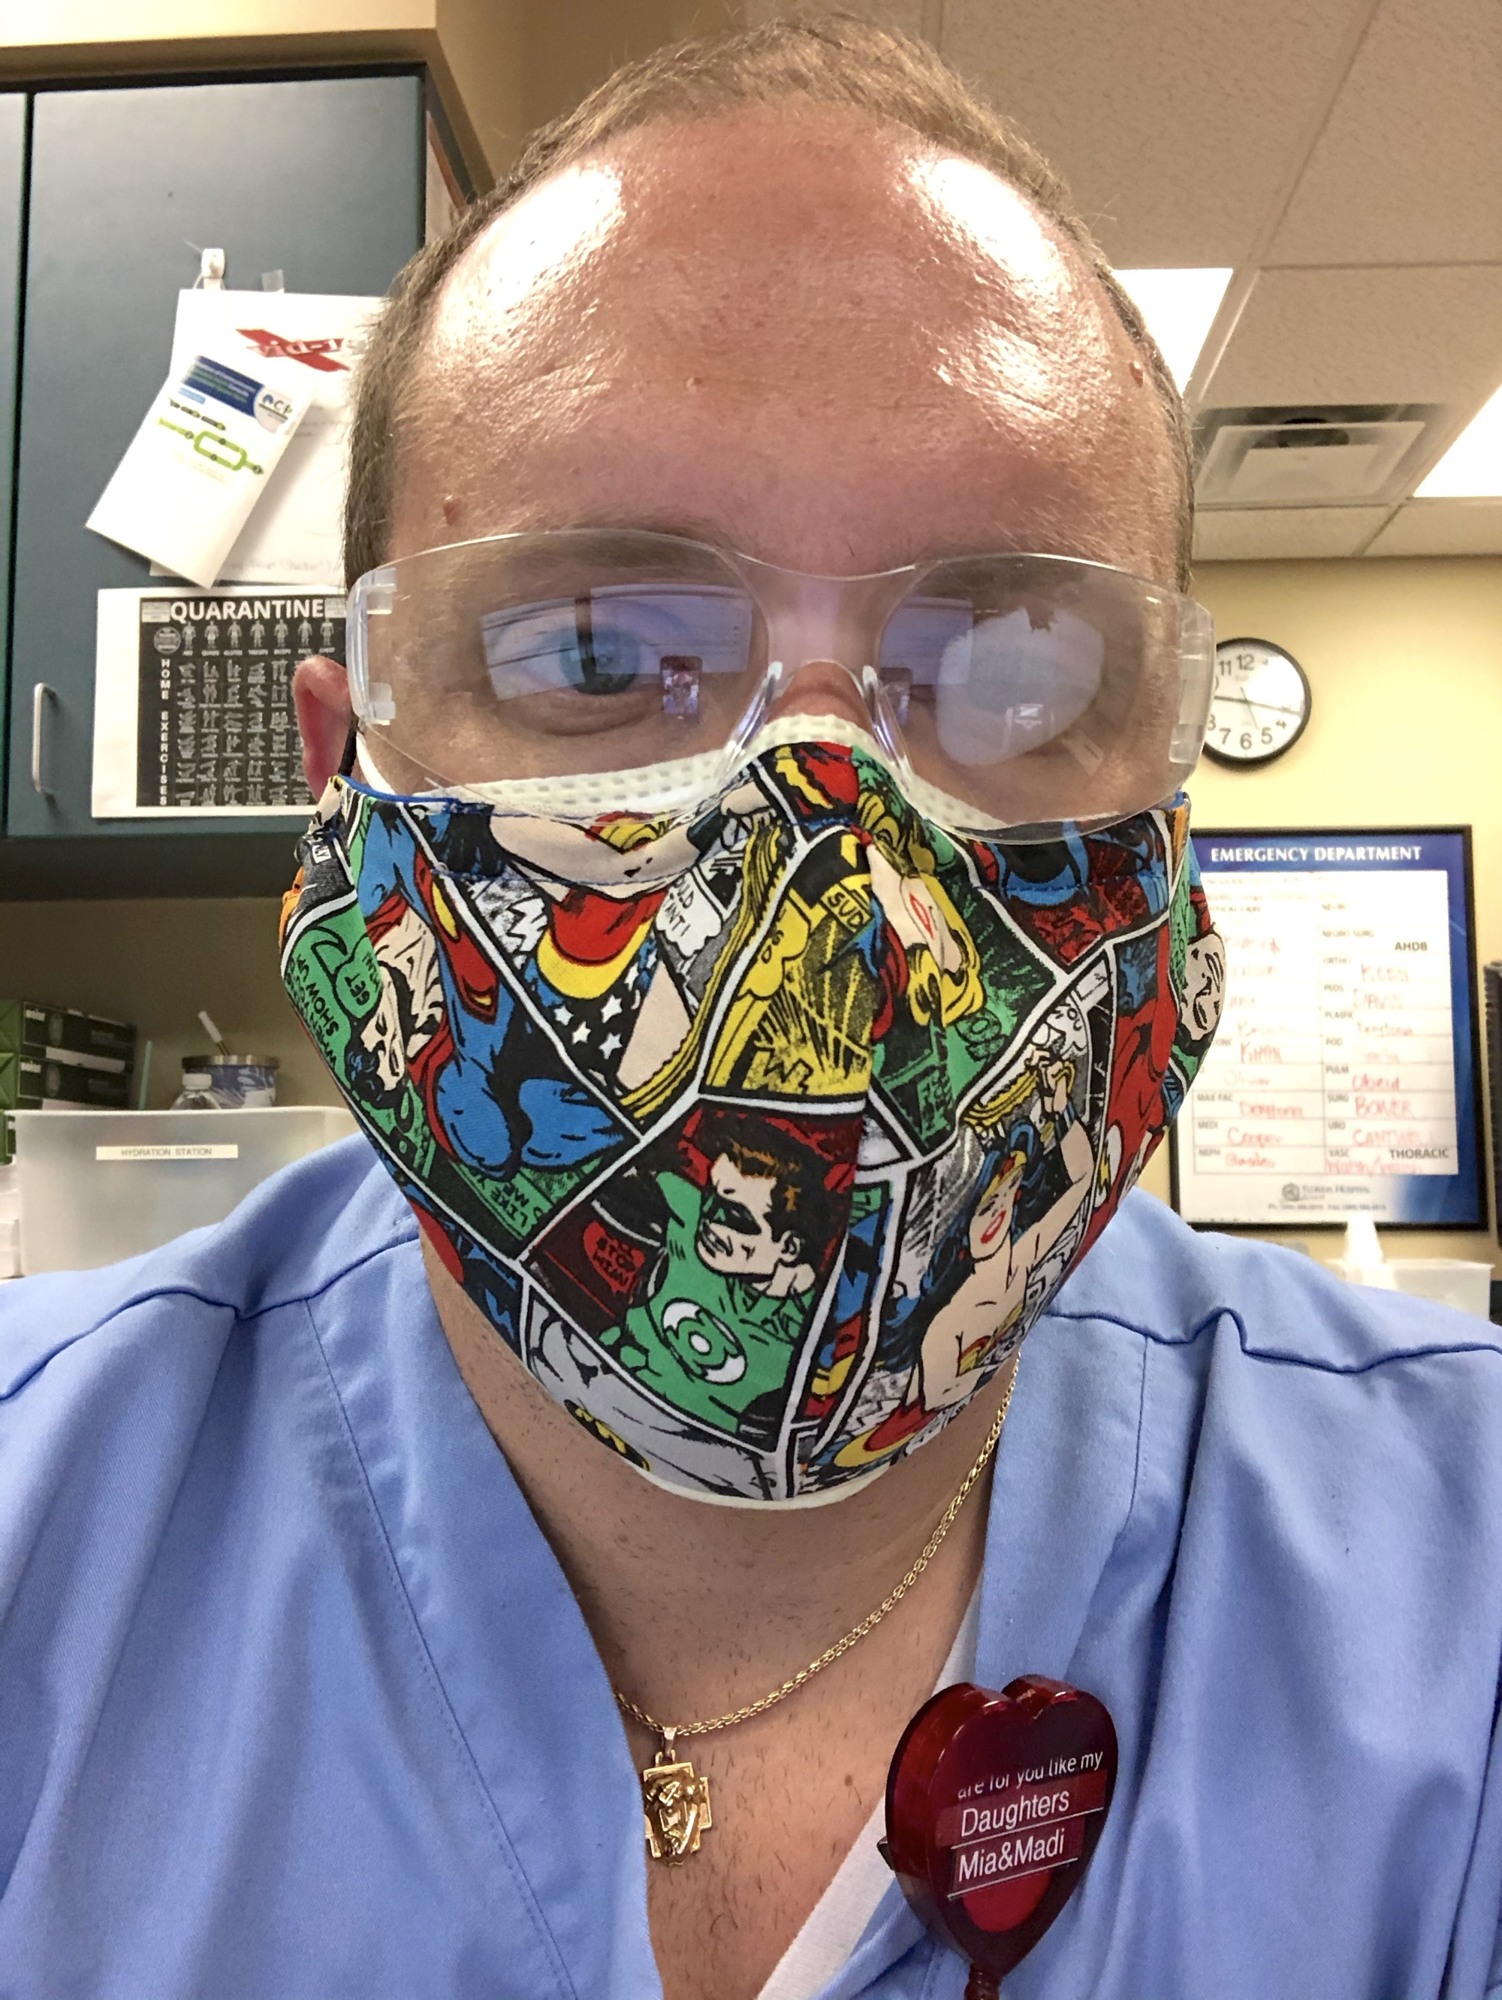 Palm Coast's Sean O'Brien and other health care workers, along with people in close contact with those who are infected with COVID-19, should wear masks. Courtesy photo